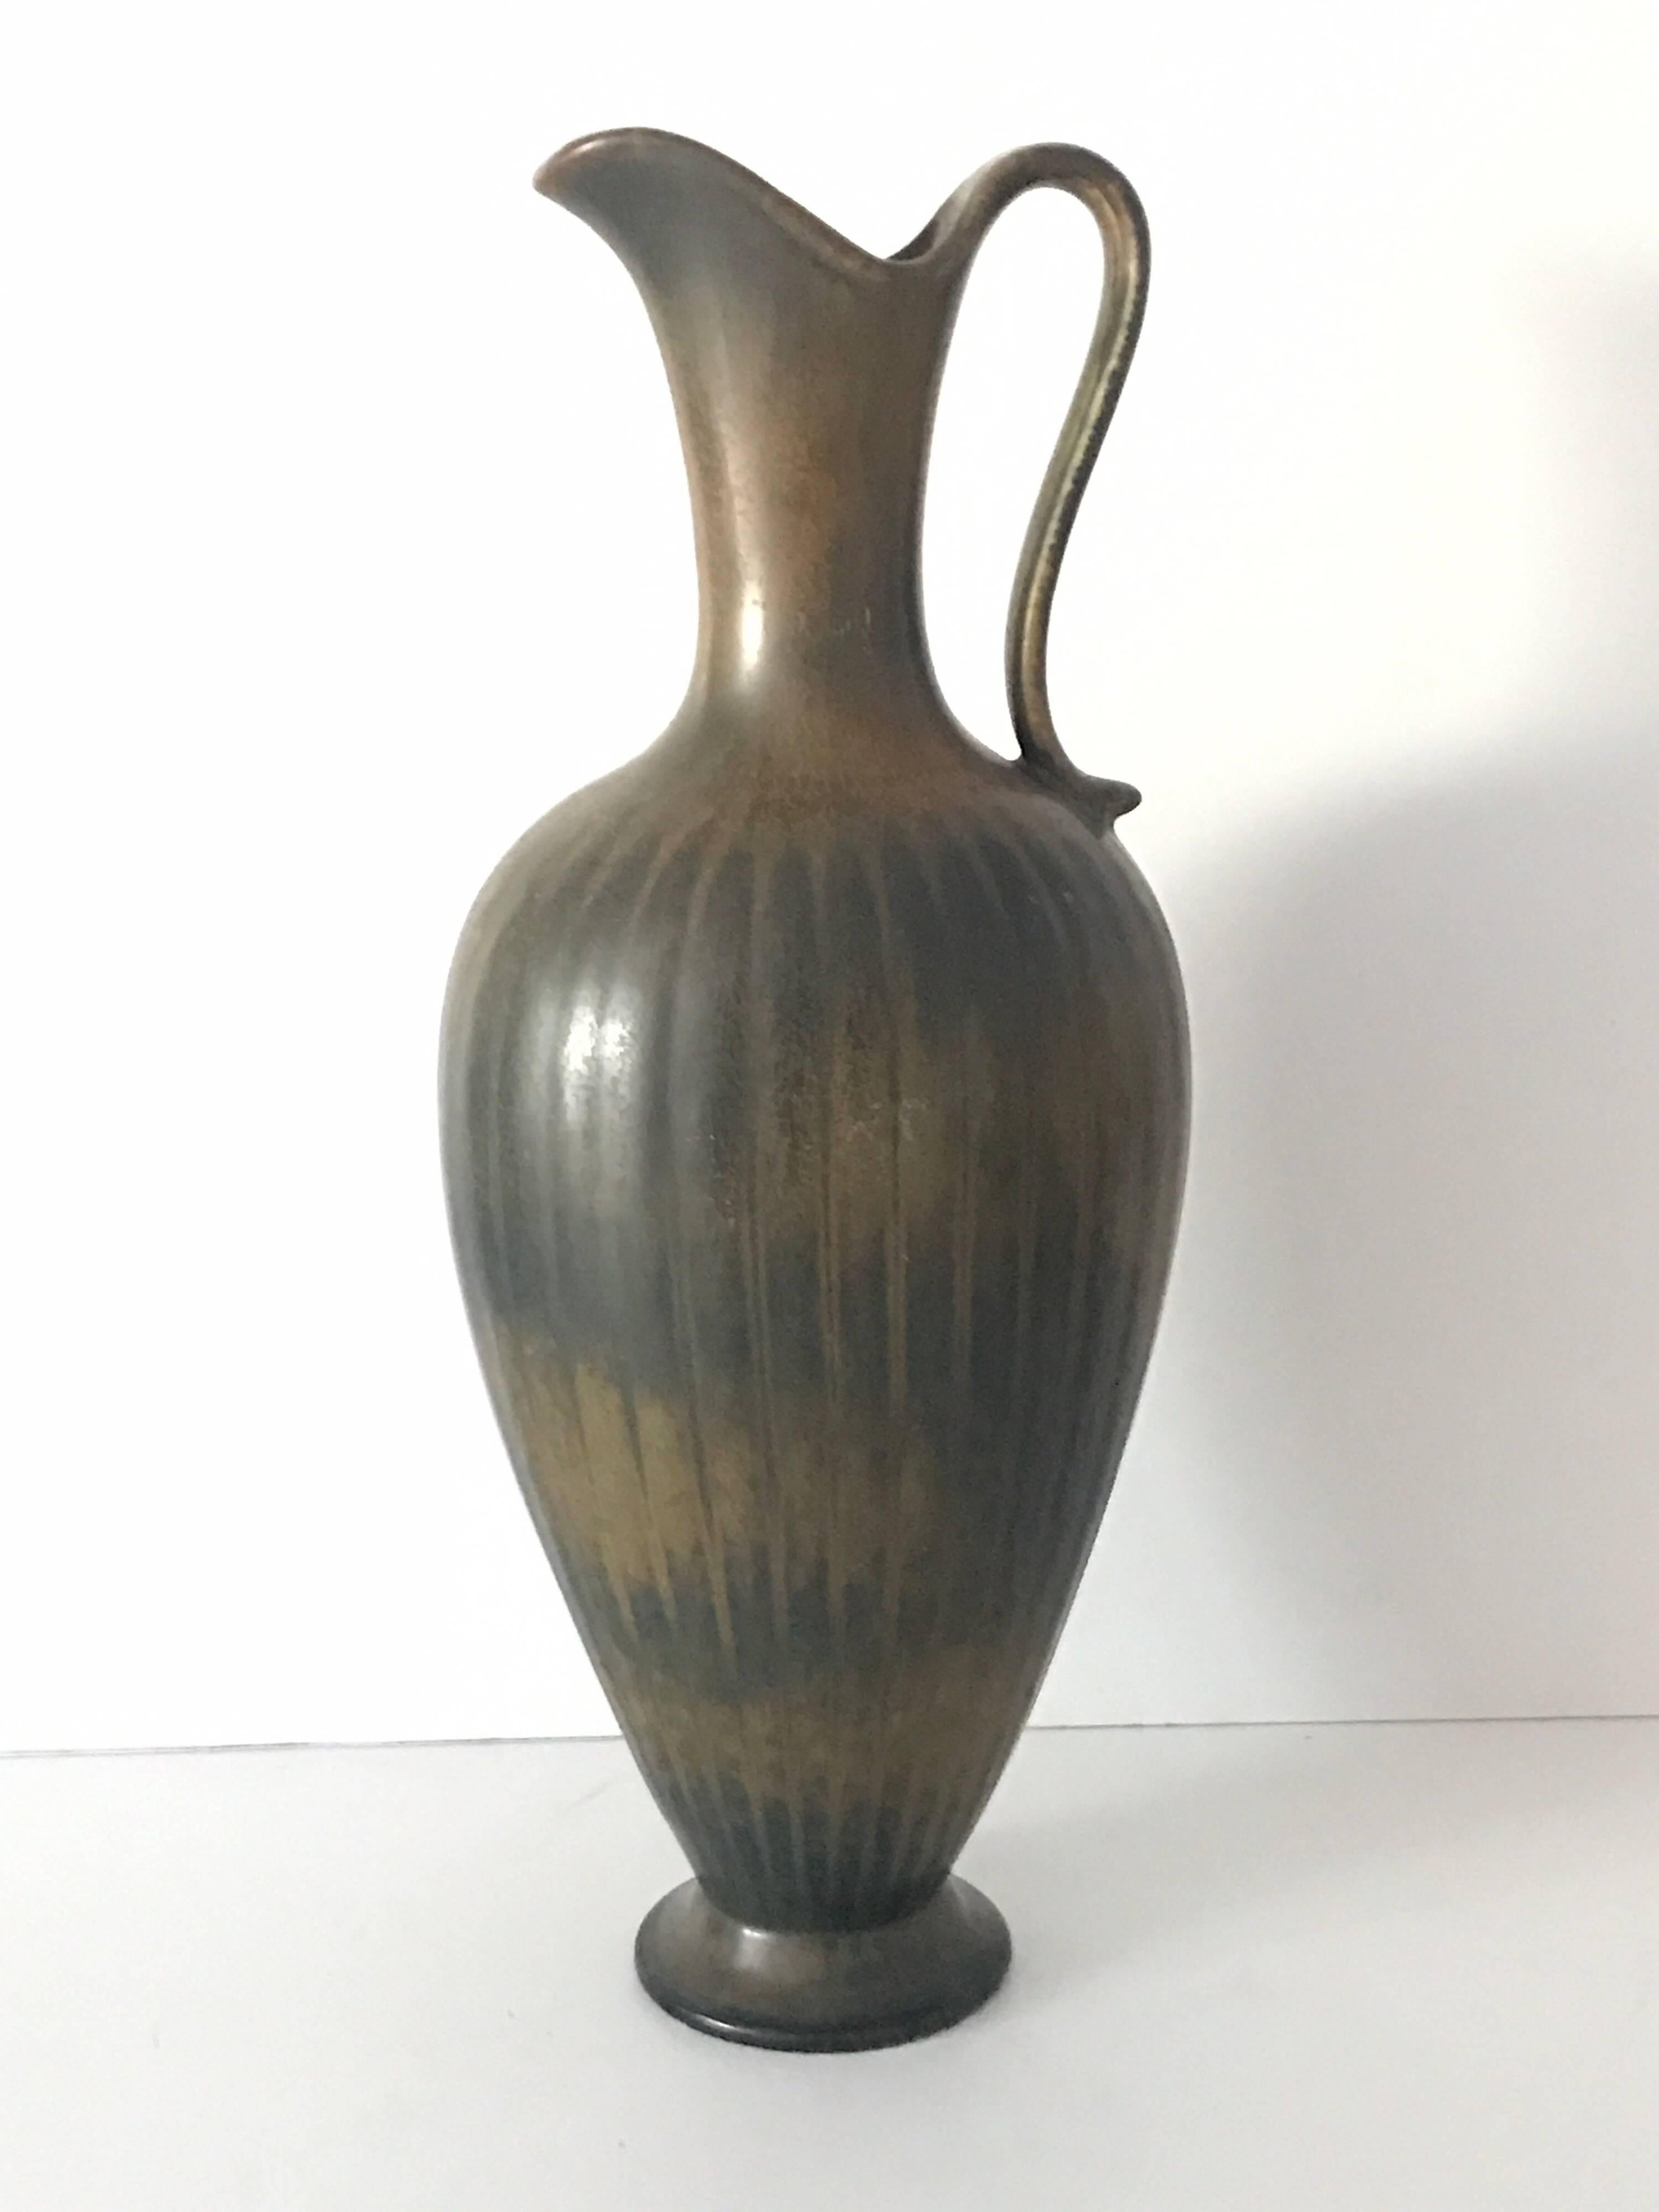 Large Swedish Rörstrand Gunnar Nylund Ceramic Amphora vase or decanter, 1950.
A very large beautiful olive green/black amphora vase, decanter or ewer. This vase was made at Rörstrand and was made in the mid-20th century by one of the greatest